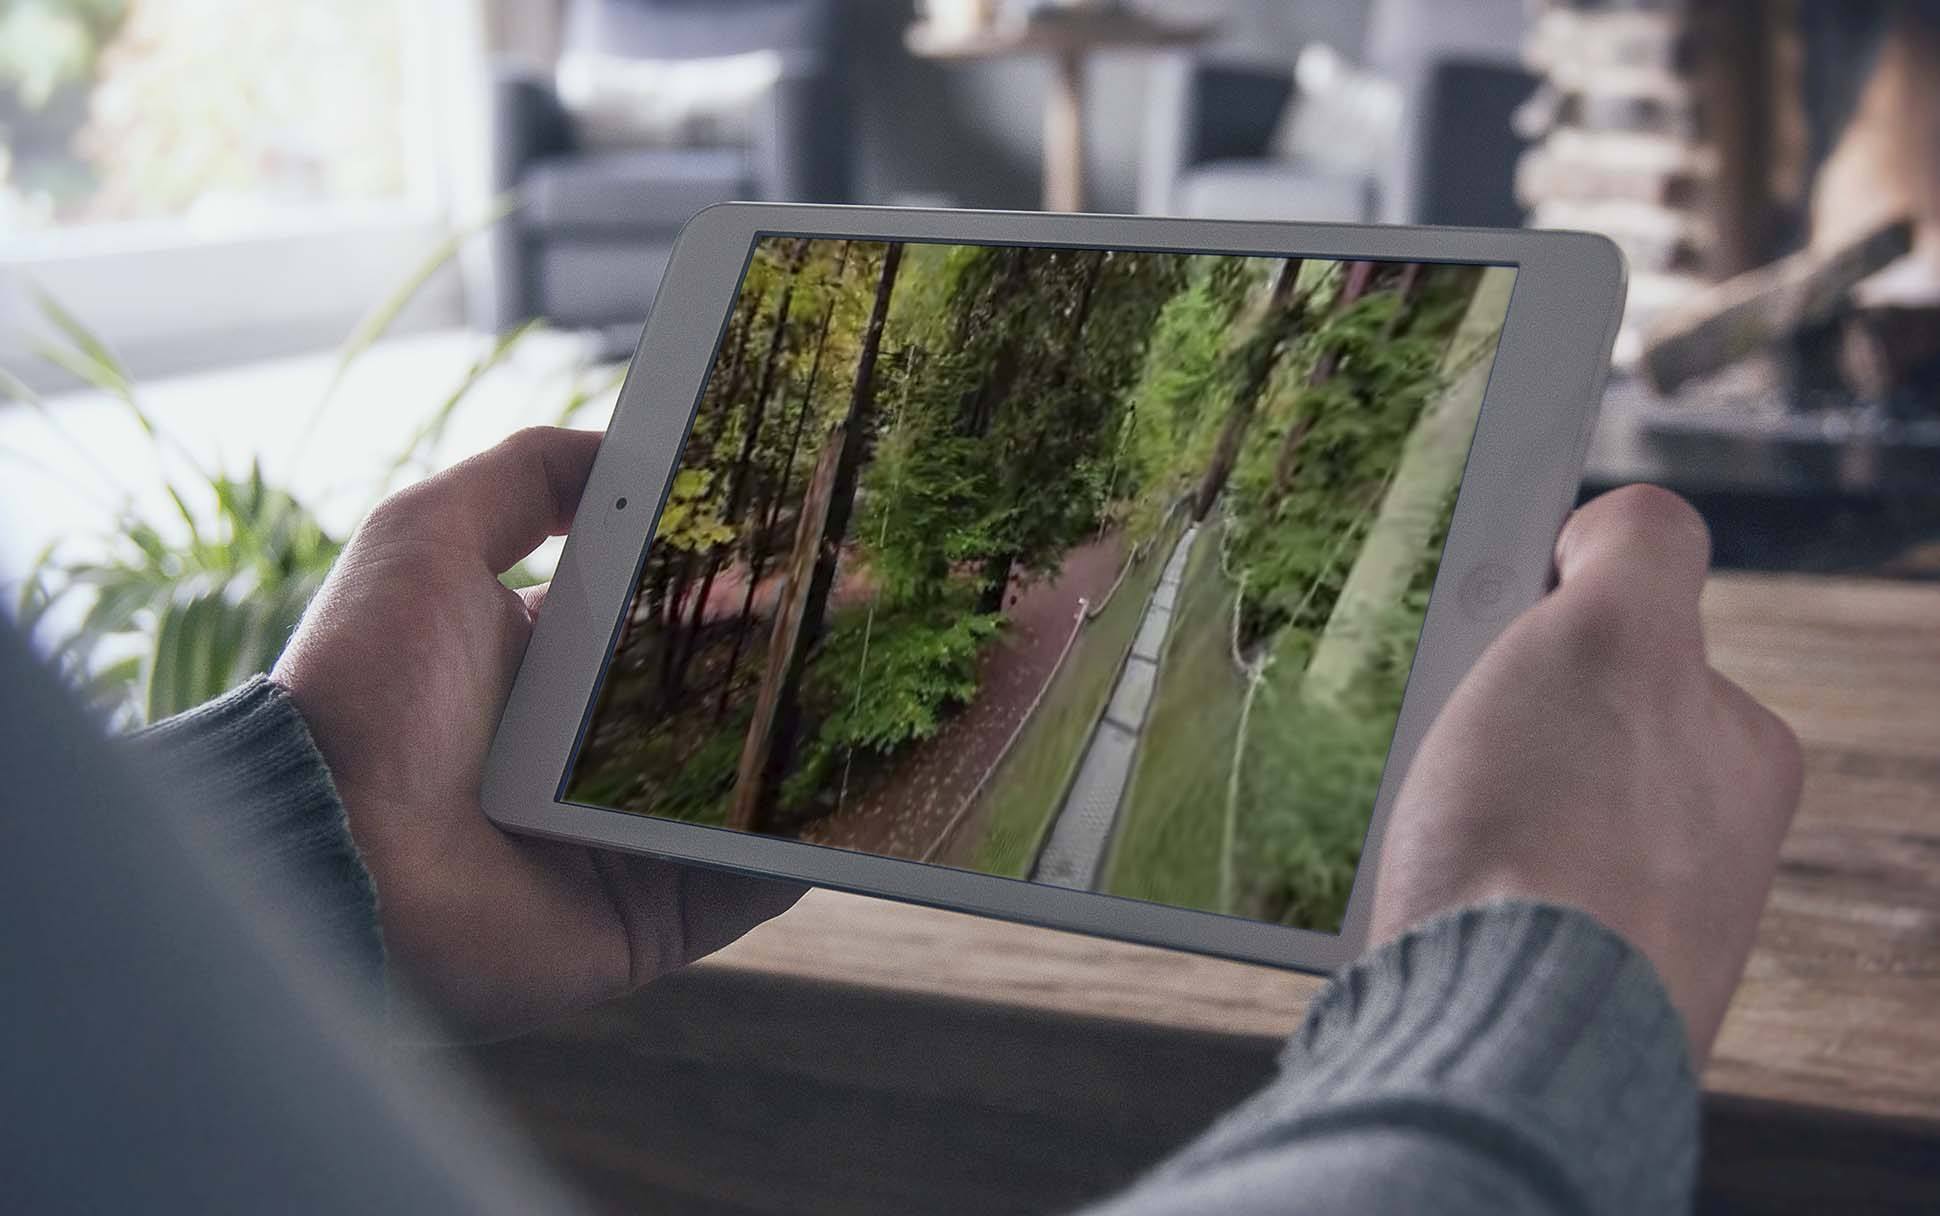 A person watches a virtual tour of the UBC Botanical Garden on their tablet.